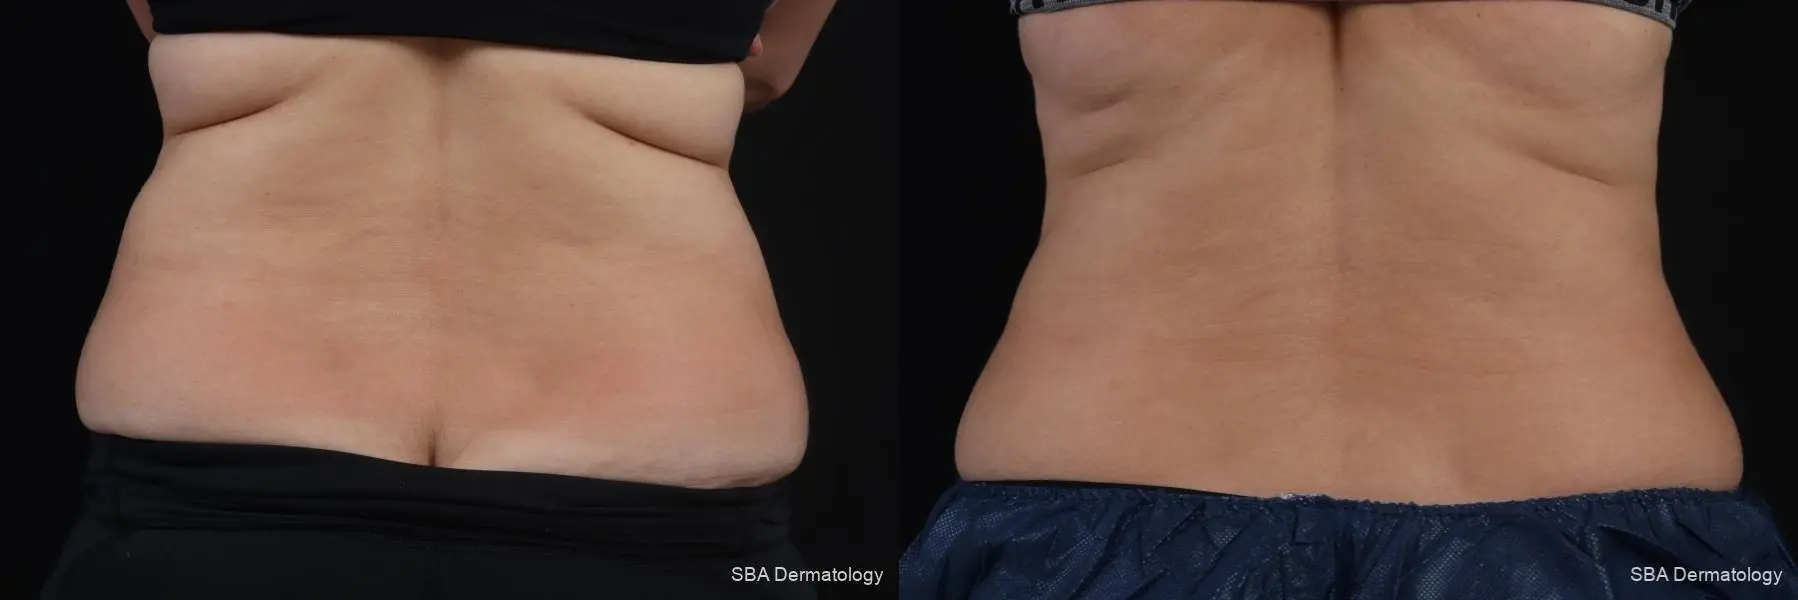 Coolsculpting: Patient 6 - Before and After 5